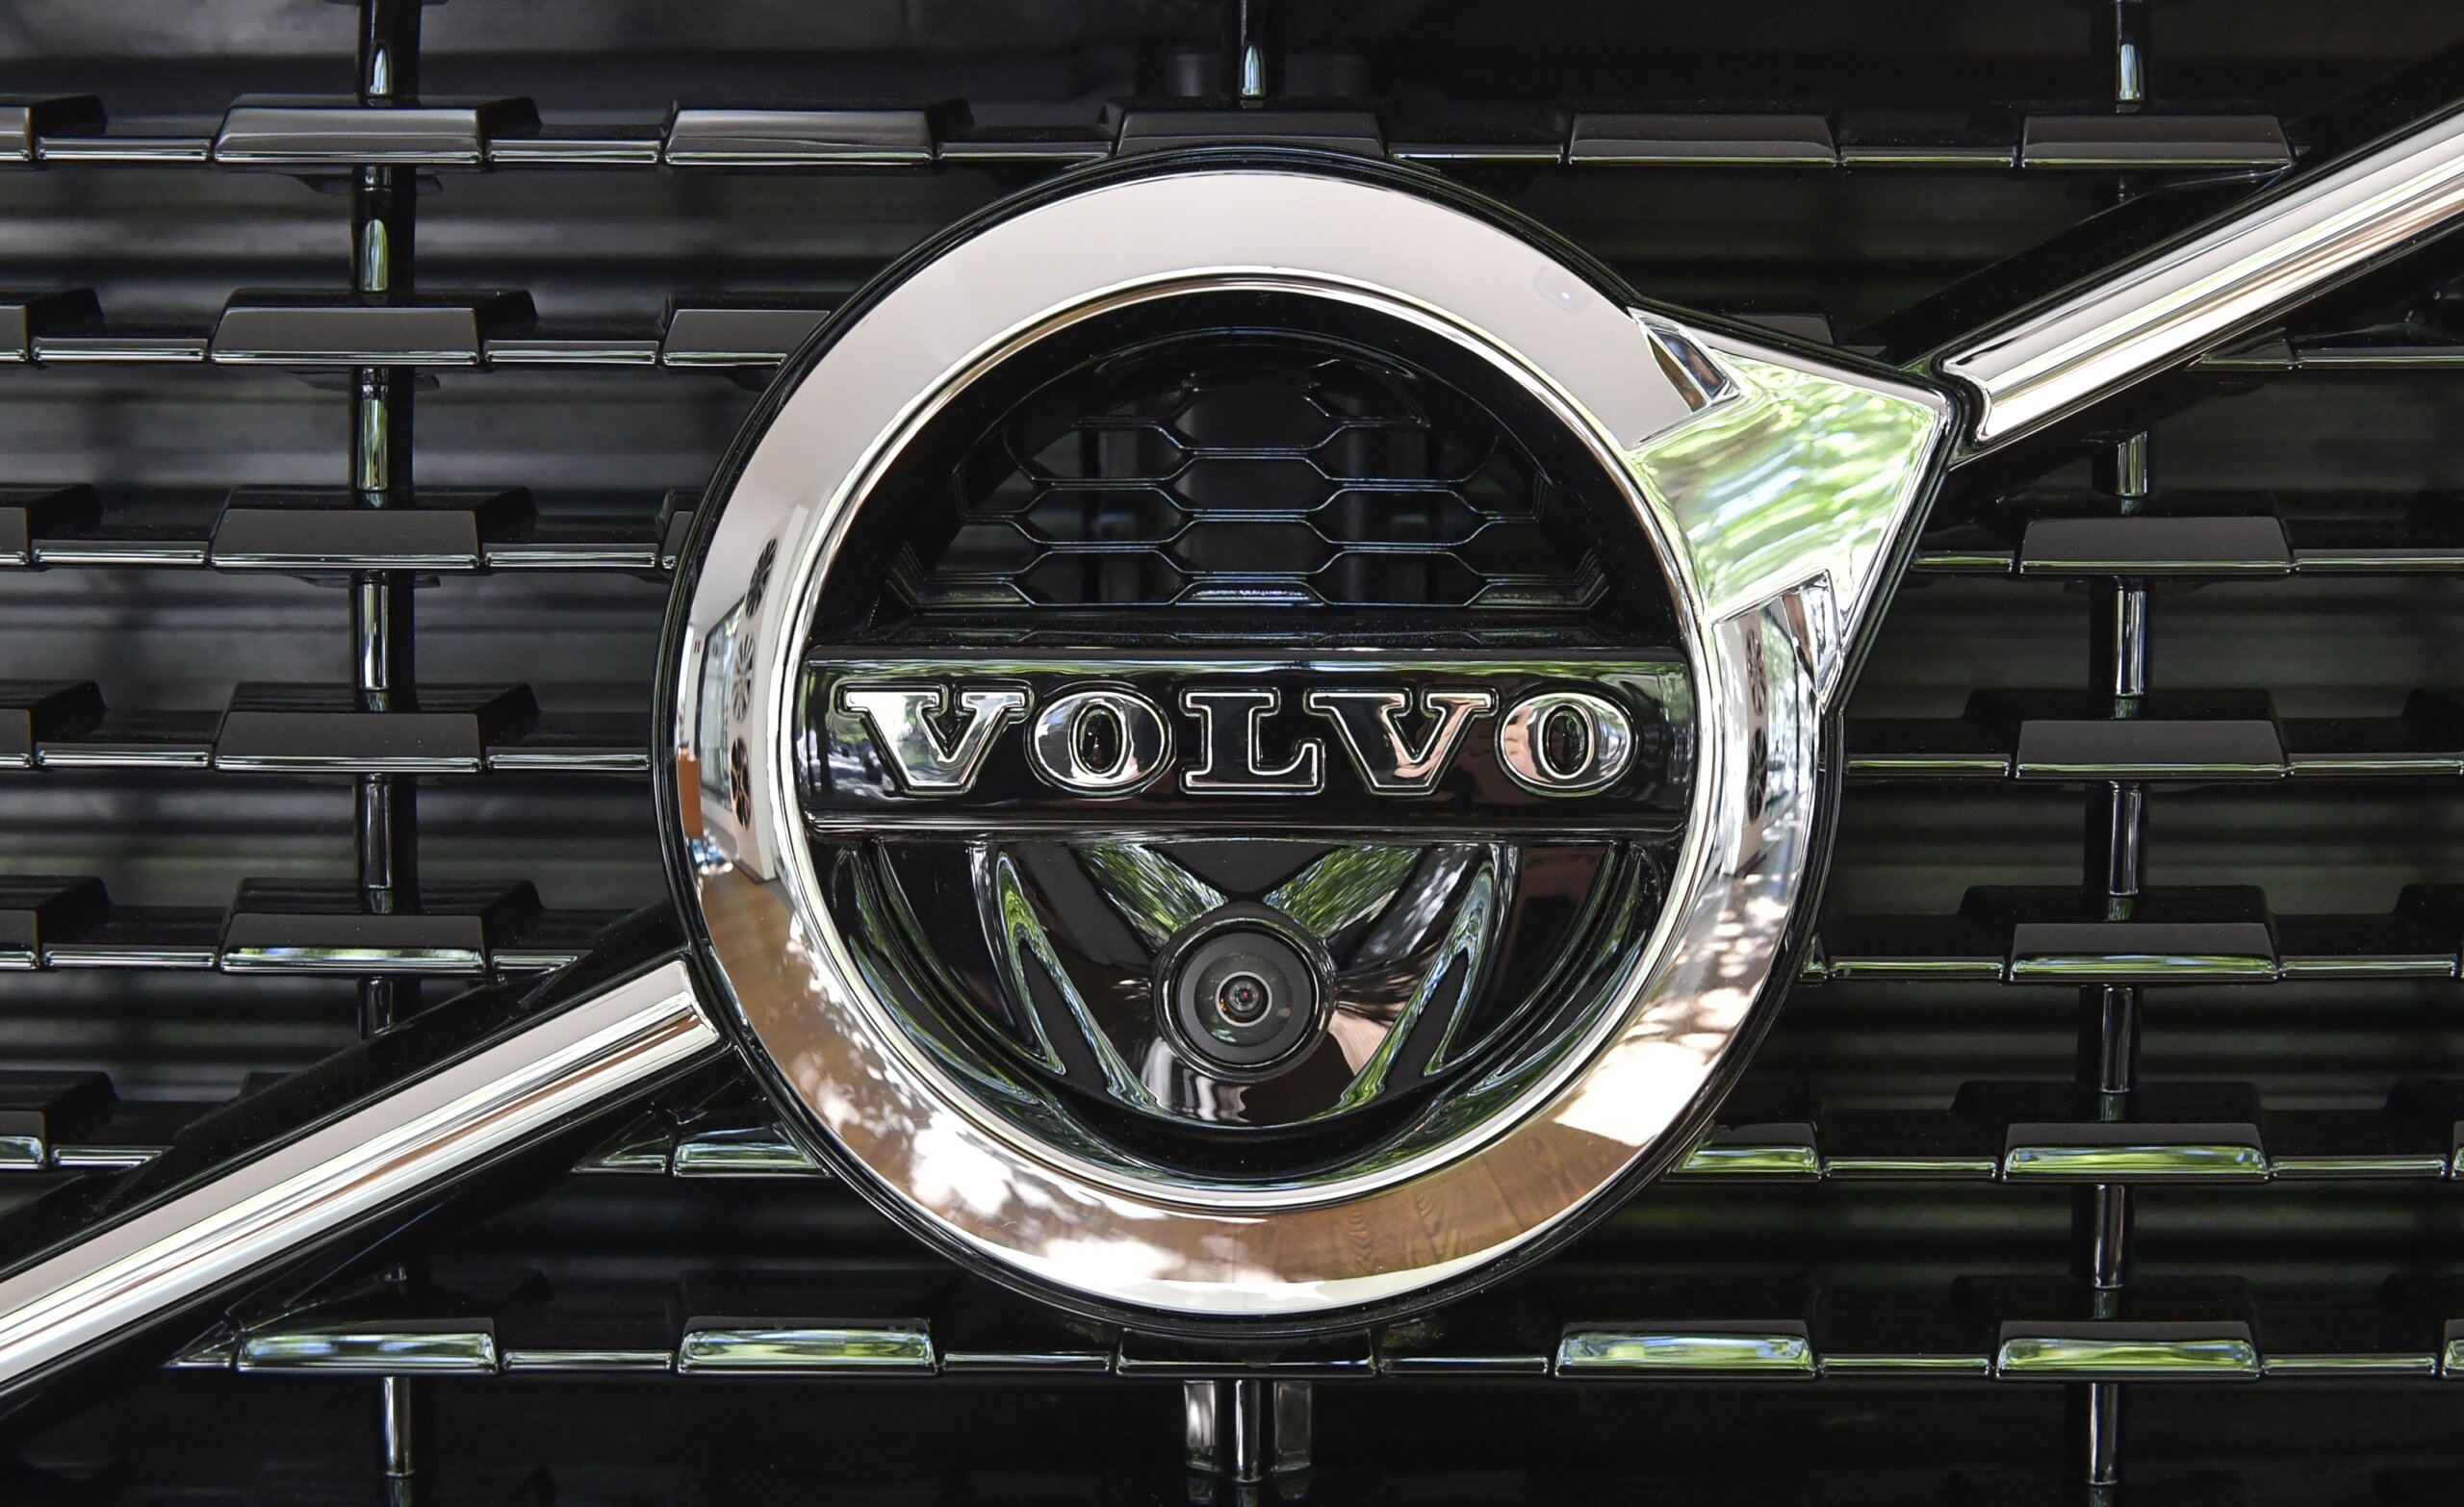 Volvo Group North America faces $130M civil penalty